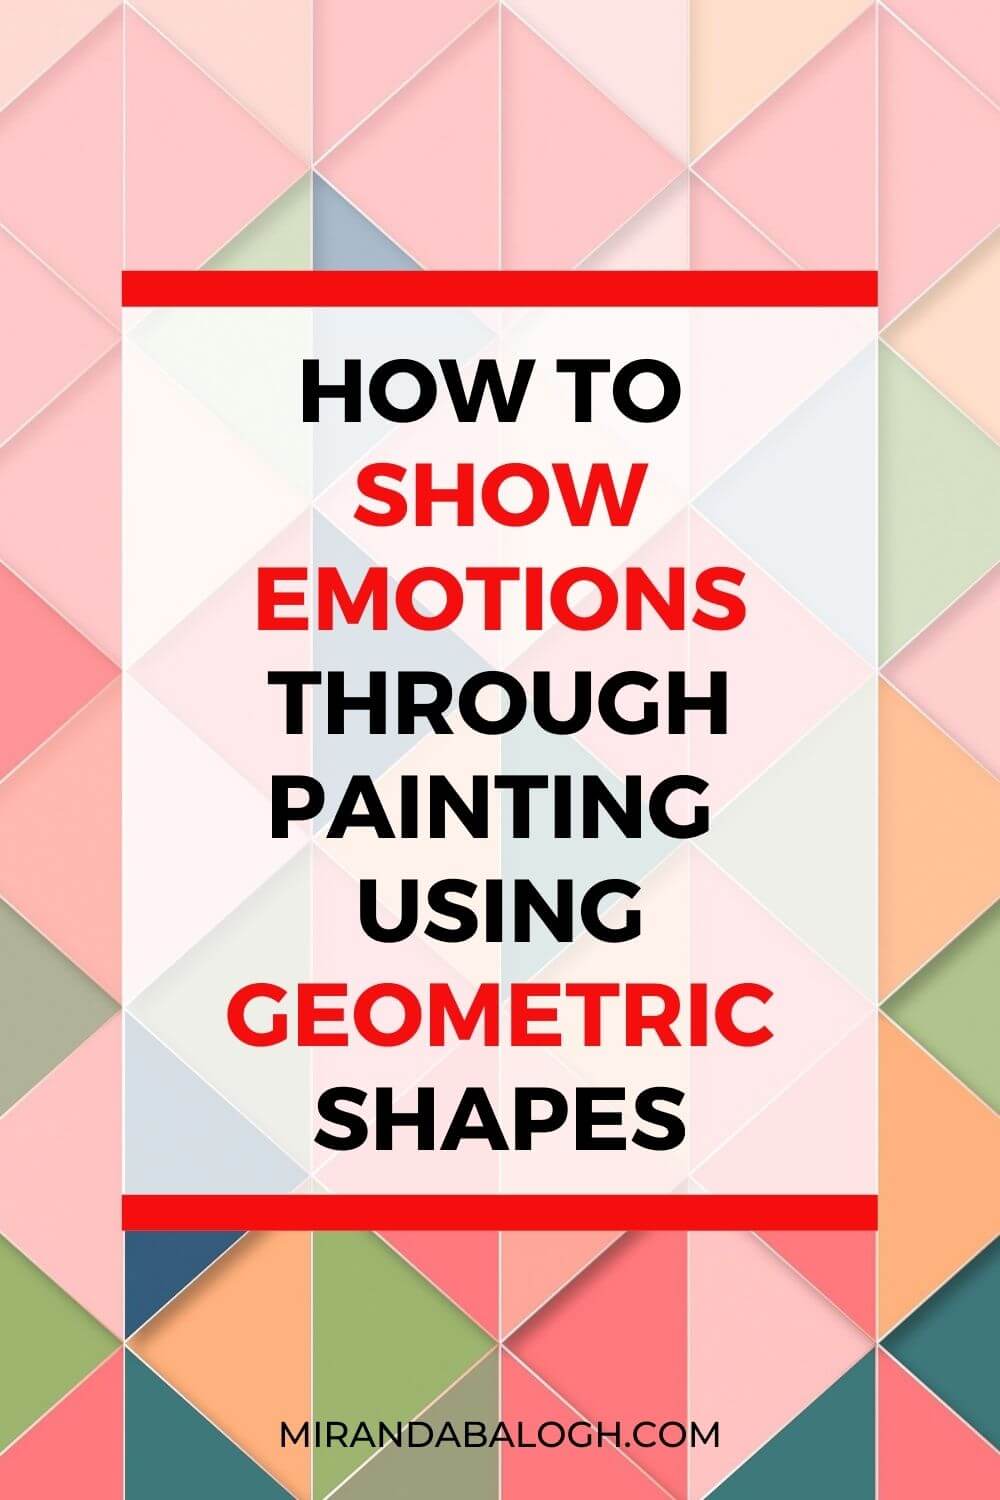 How is emotion shown in art? One way to convey emotion in art is by using geometric shapes. For example, a circle represents calm whereas a square represent distress. Moreover, expressing emotions through art can be achieved by using light colours to depict happiness and dark colours to symbolize depression. As you can see, geometric shapes and emotions in art are intrinsically connected on an emotional and psychological level.